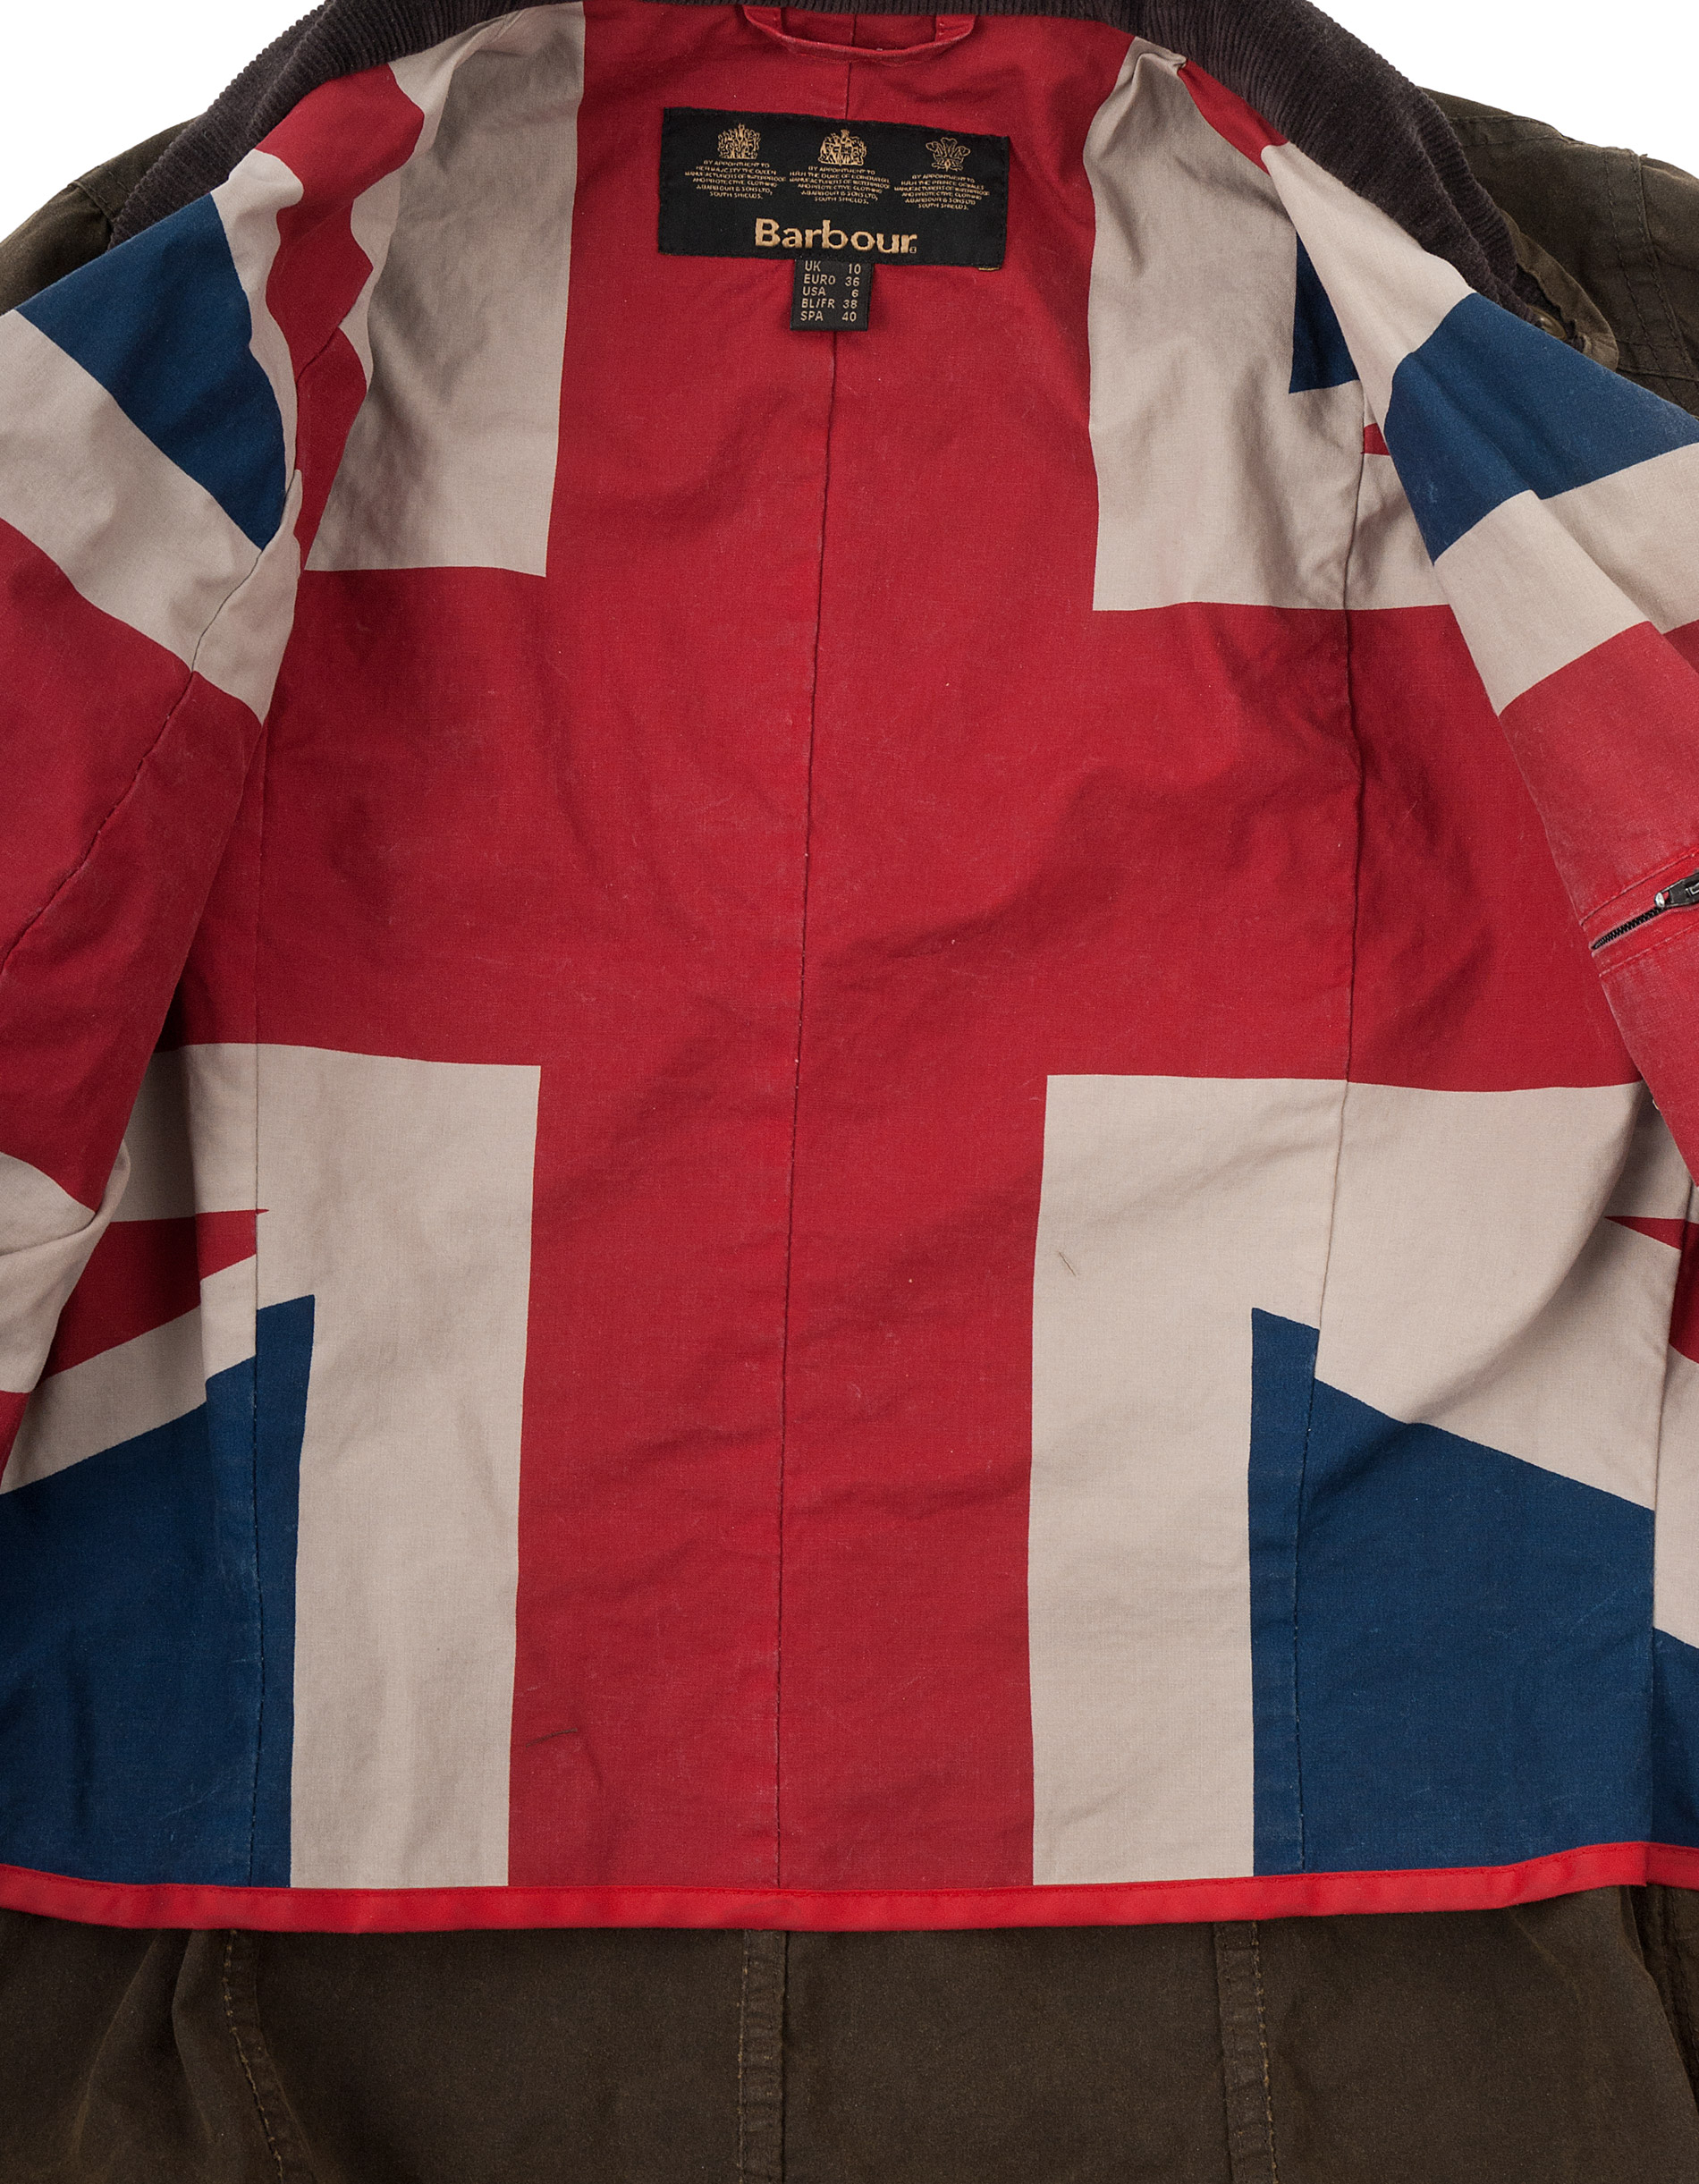 Barbour jacket with Union Jack lining – Le Blow1900 x 2442